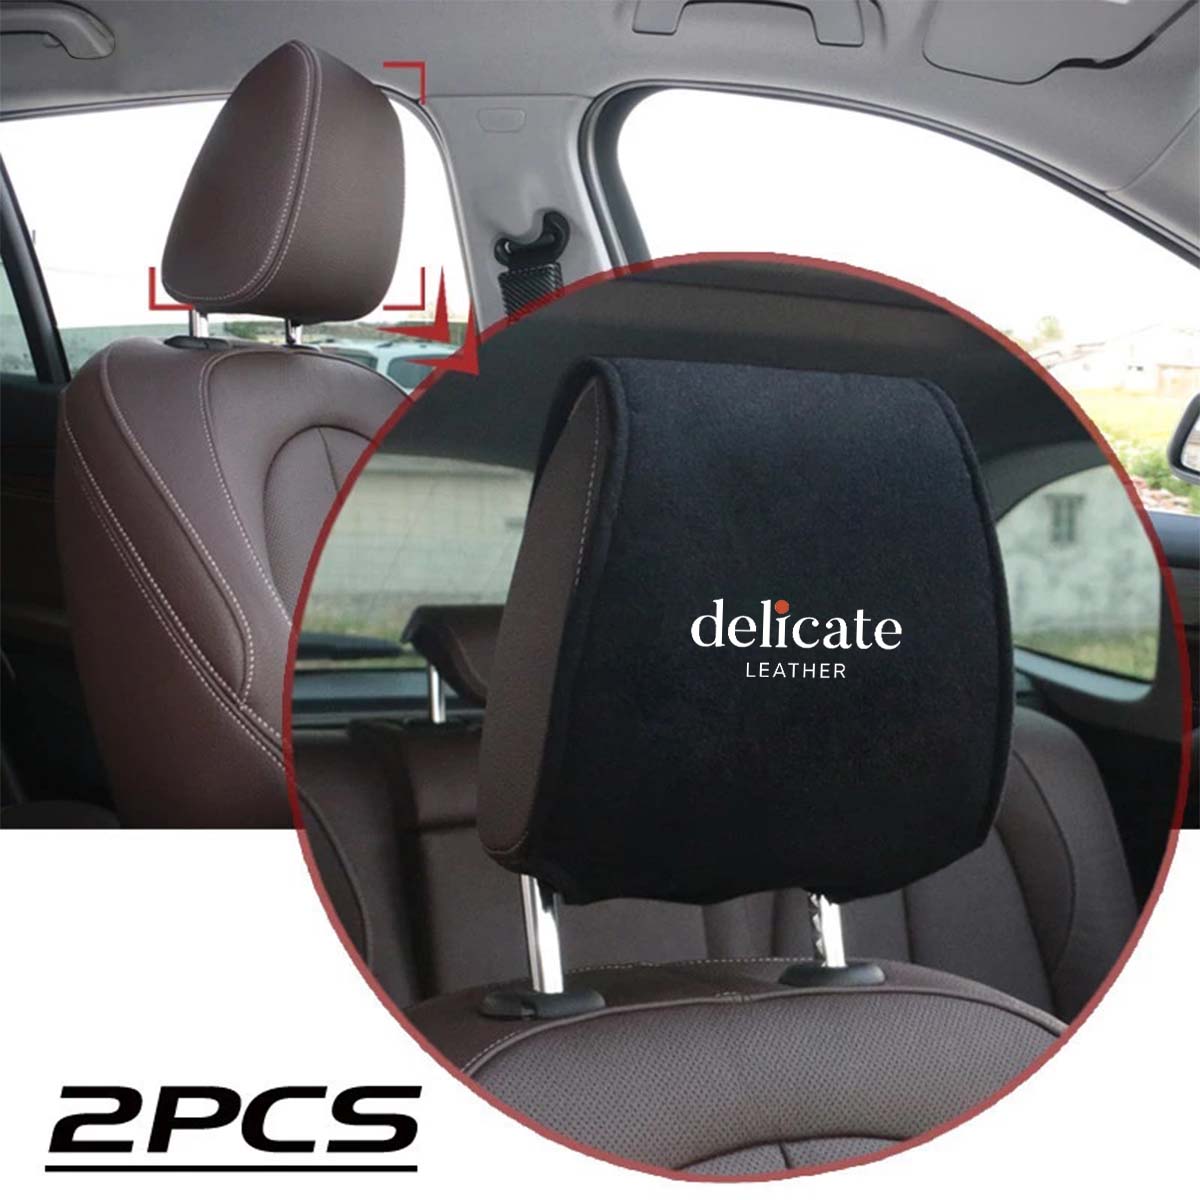 Delicate Leather Car Seat Headrest Cover Breathable Flexible Headrest Covers Velcro Auto Headrest Covers Universal Fit, Custom For Your Cars, Car Accessories TY13998 - Delicate Leather